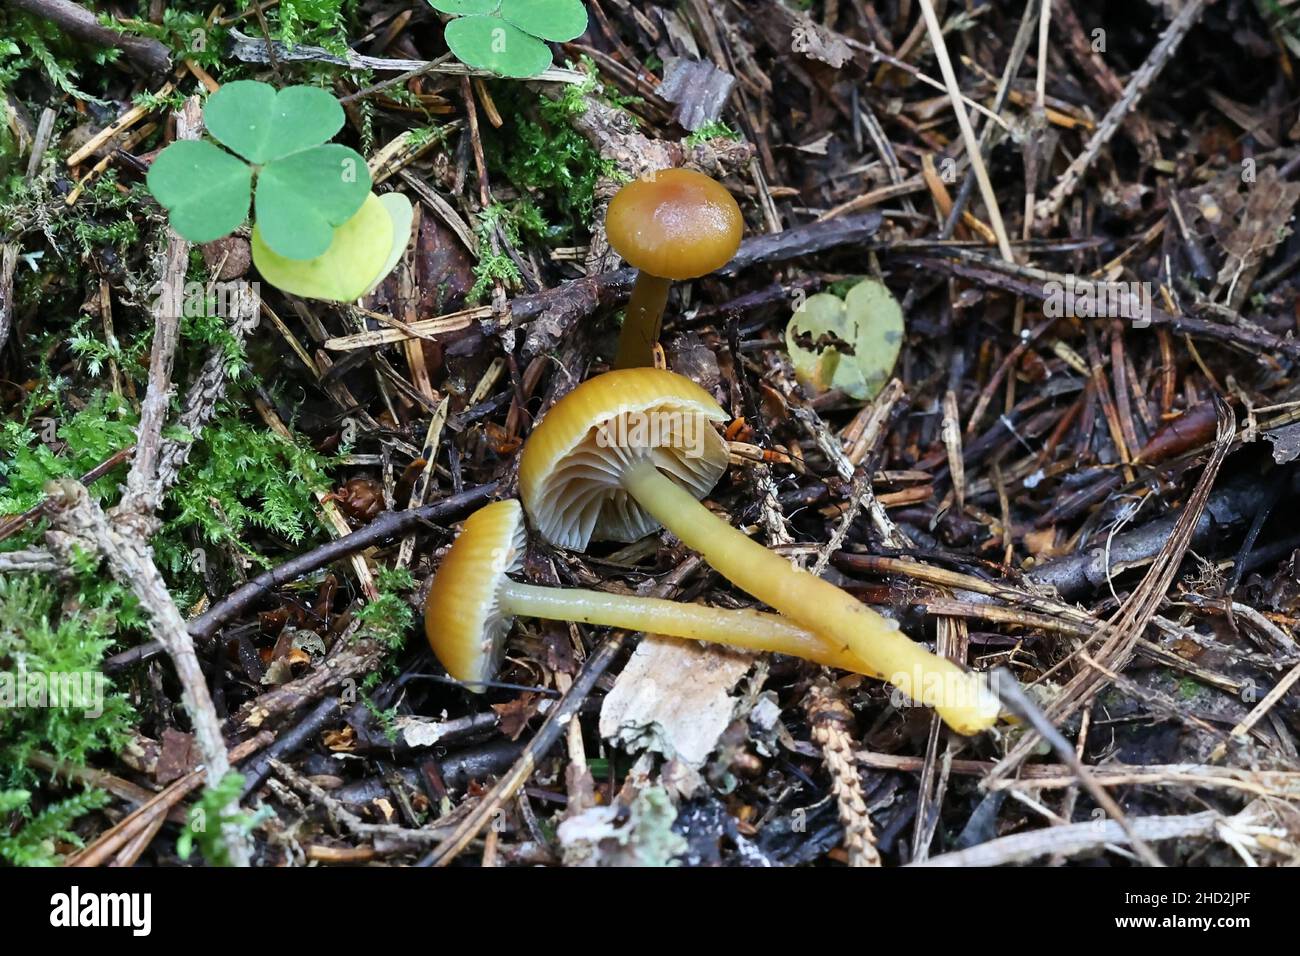 Hygrocybe laeta, also called Gliophorus laetus, commonly known as heath waxcap, wild mushroom from Finland Stock Photo